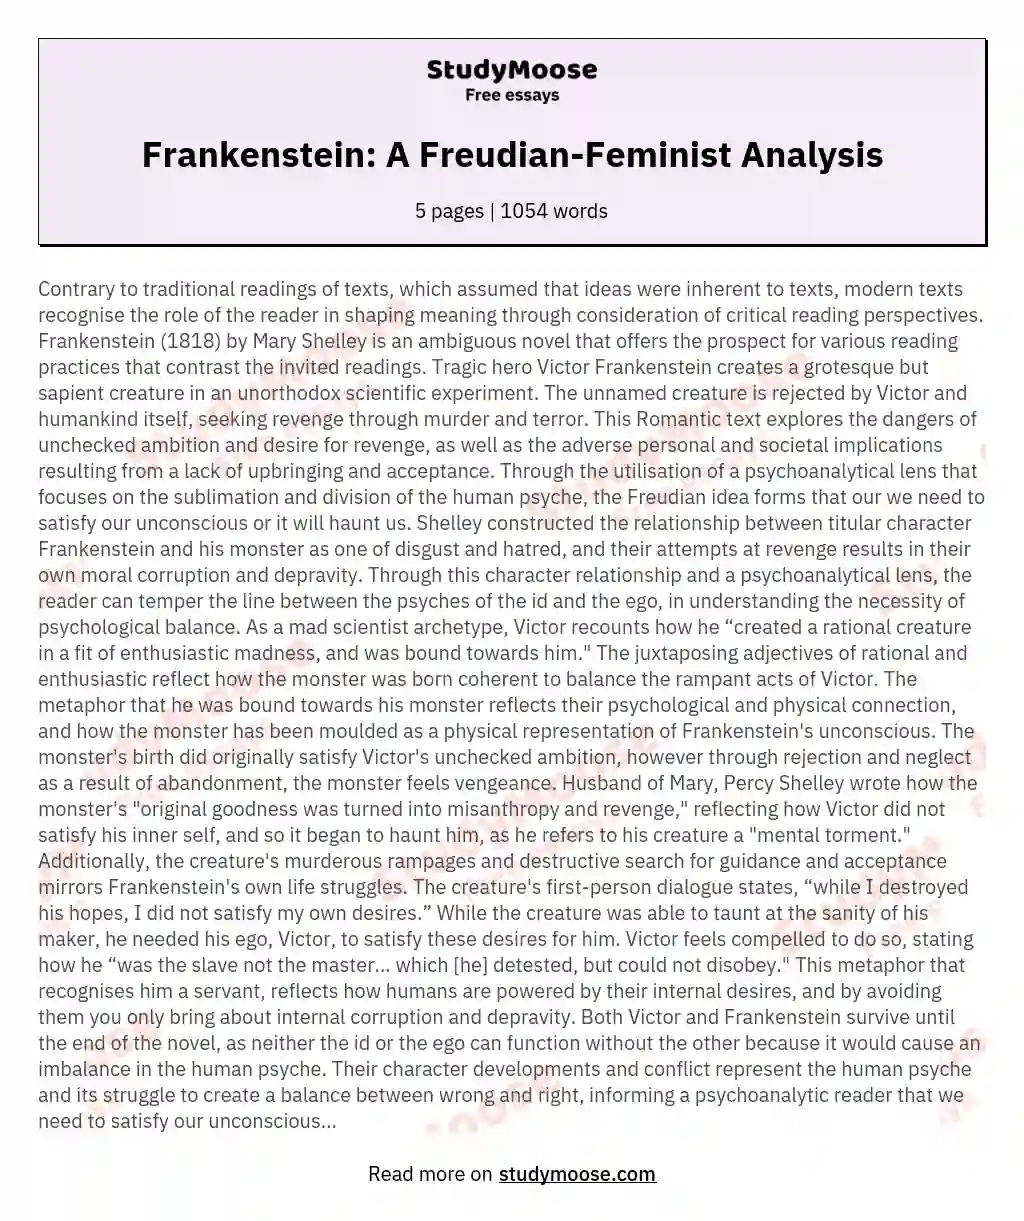 A Psychoanalytical and Feminist Perspective of Frankenstein, a Novel by Mary Shelley